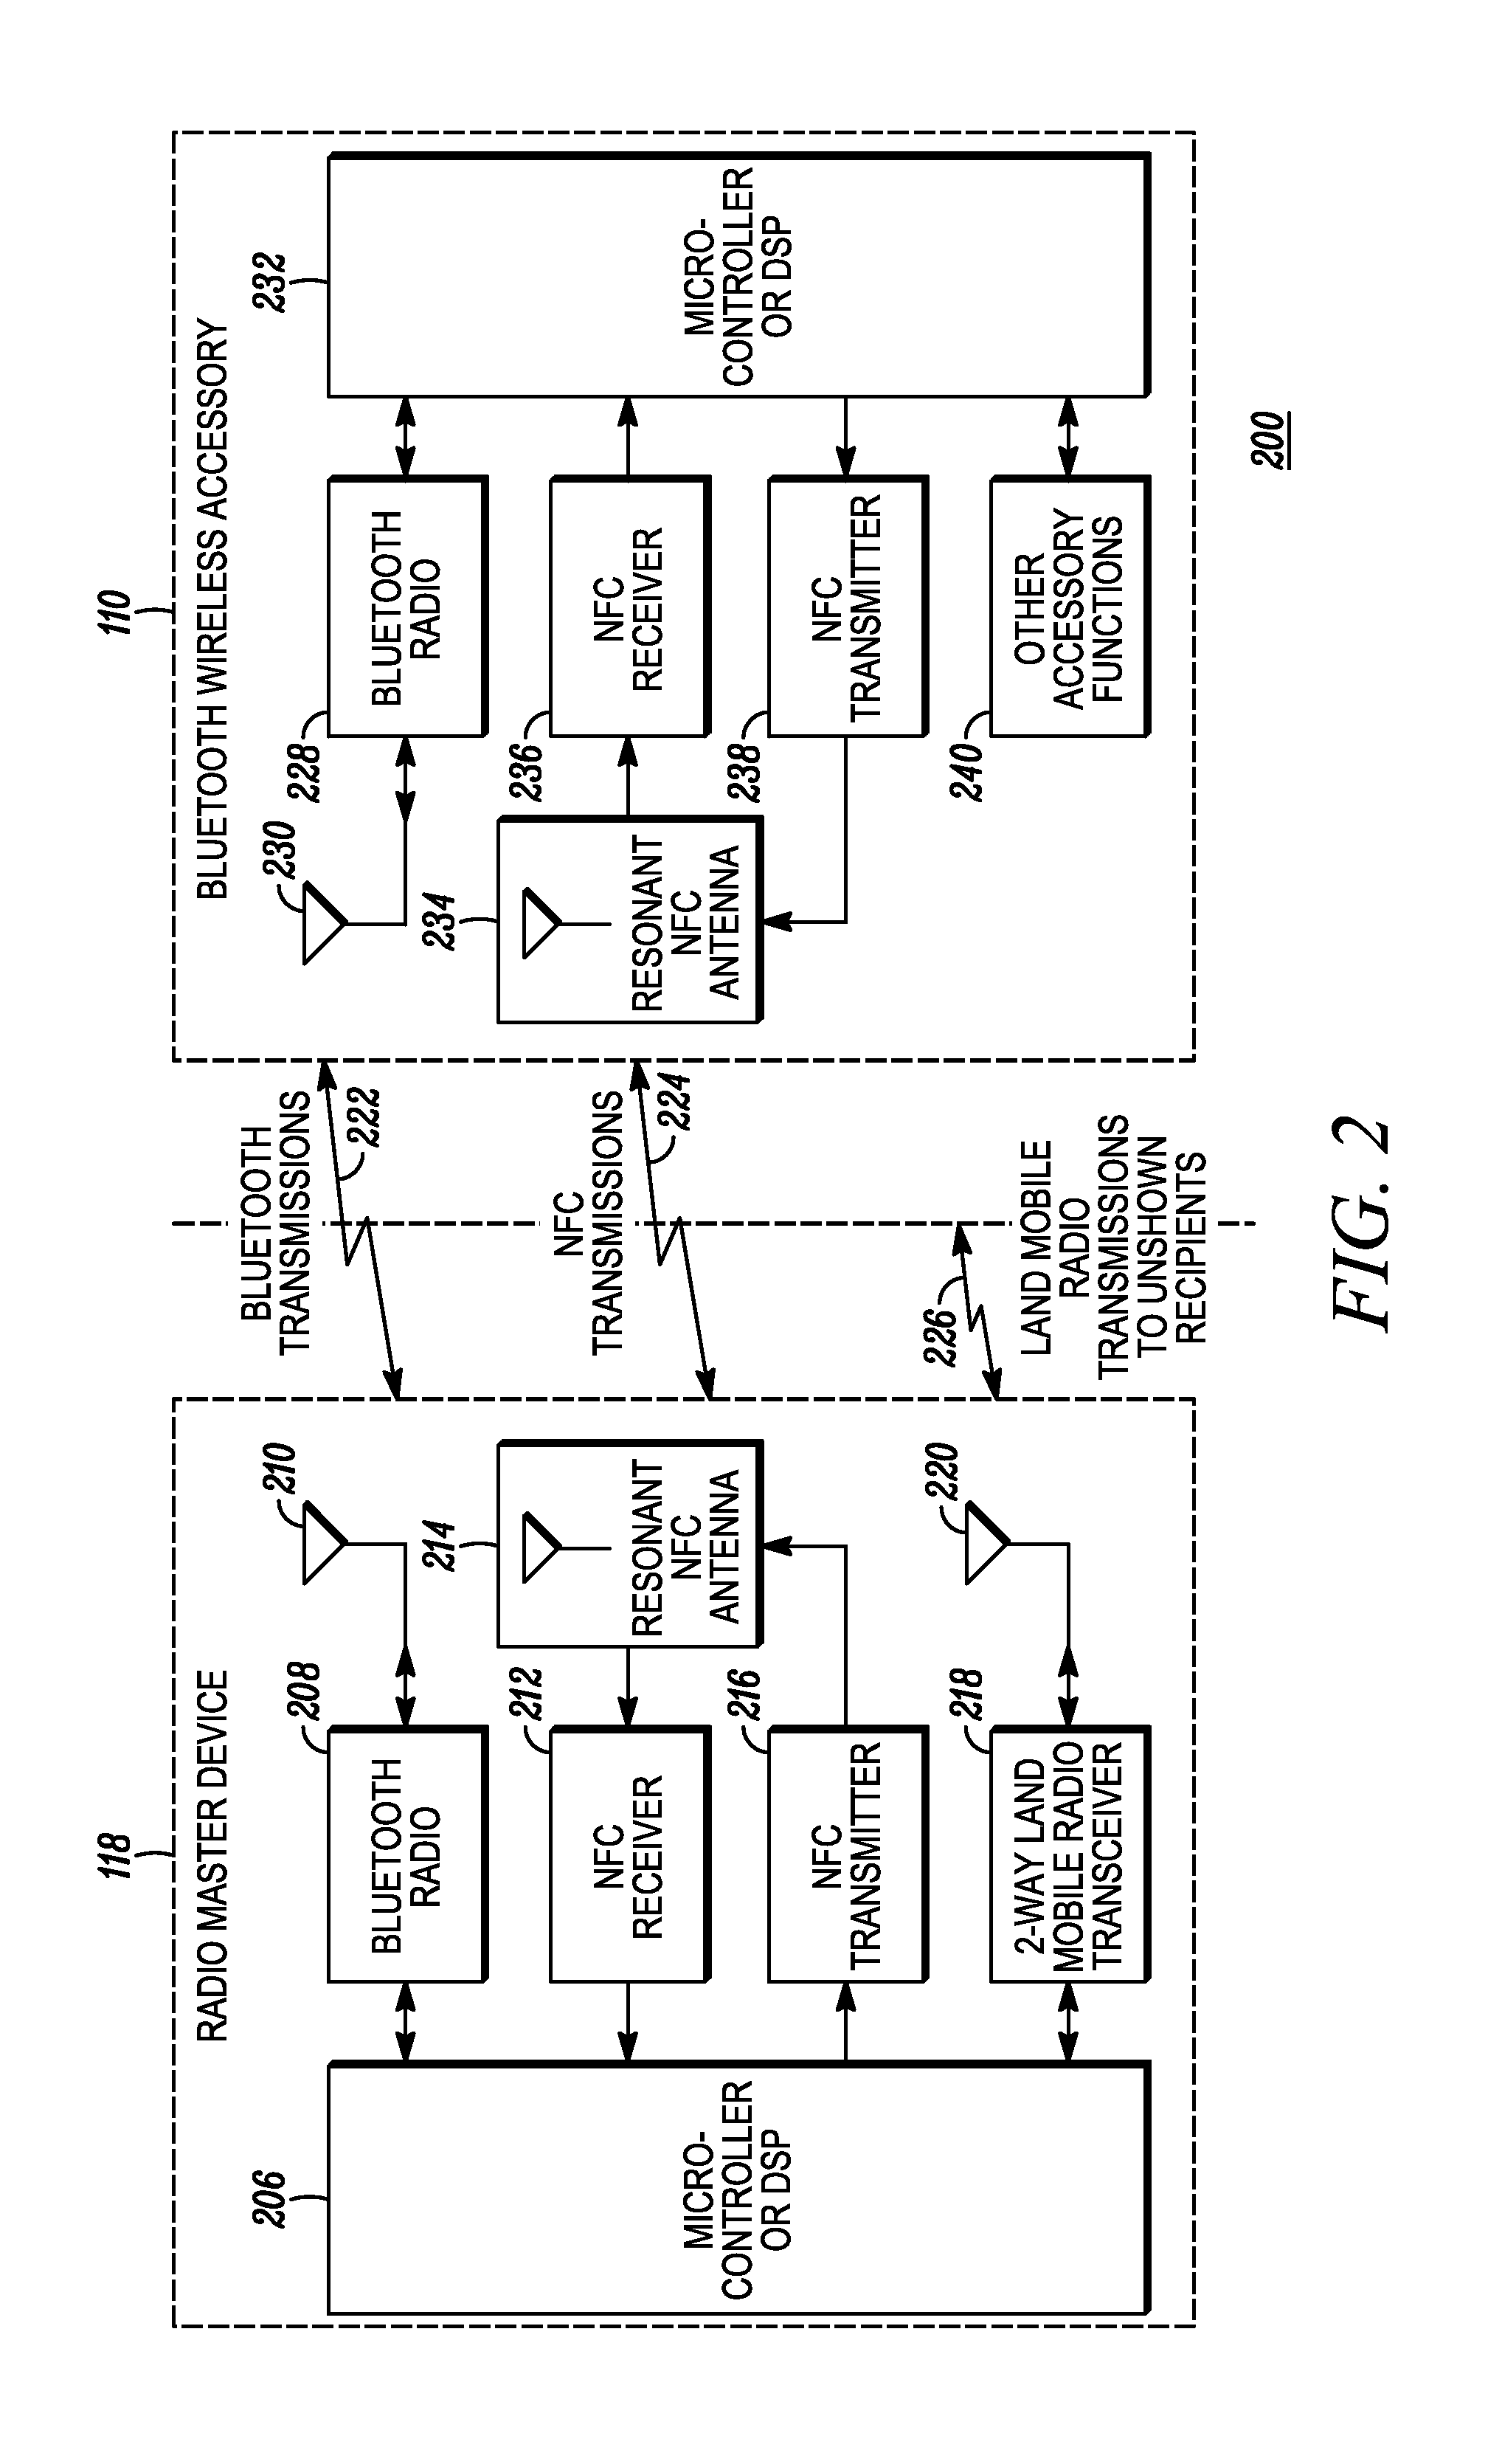 Methods for authentication using near-field